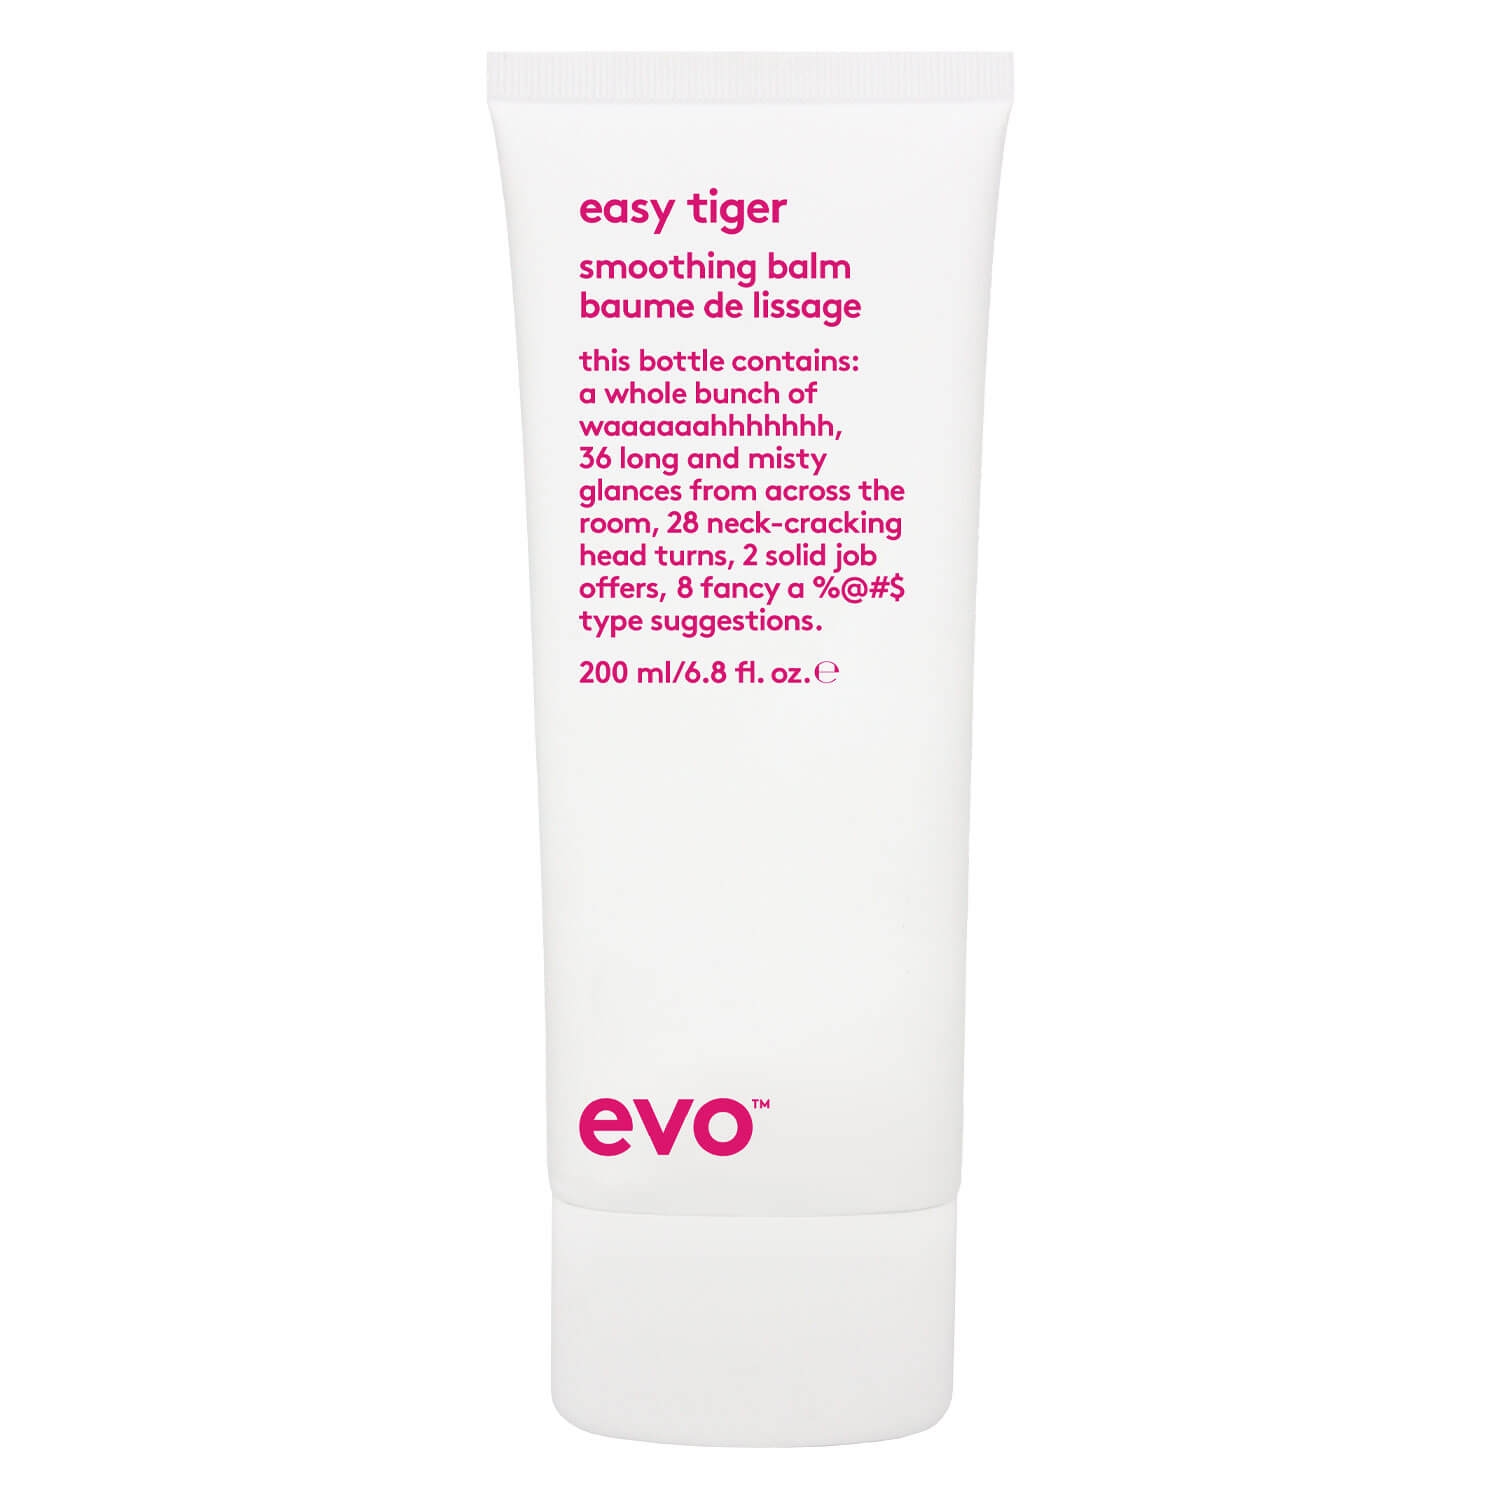 Product image from evo smooth - easy tiger smoothing balm